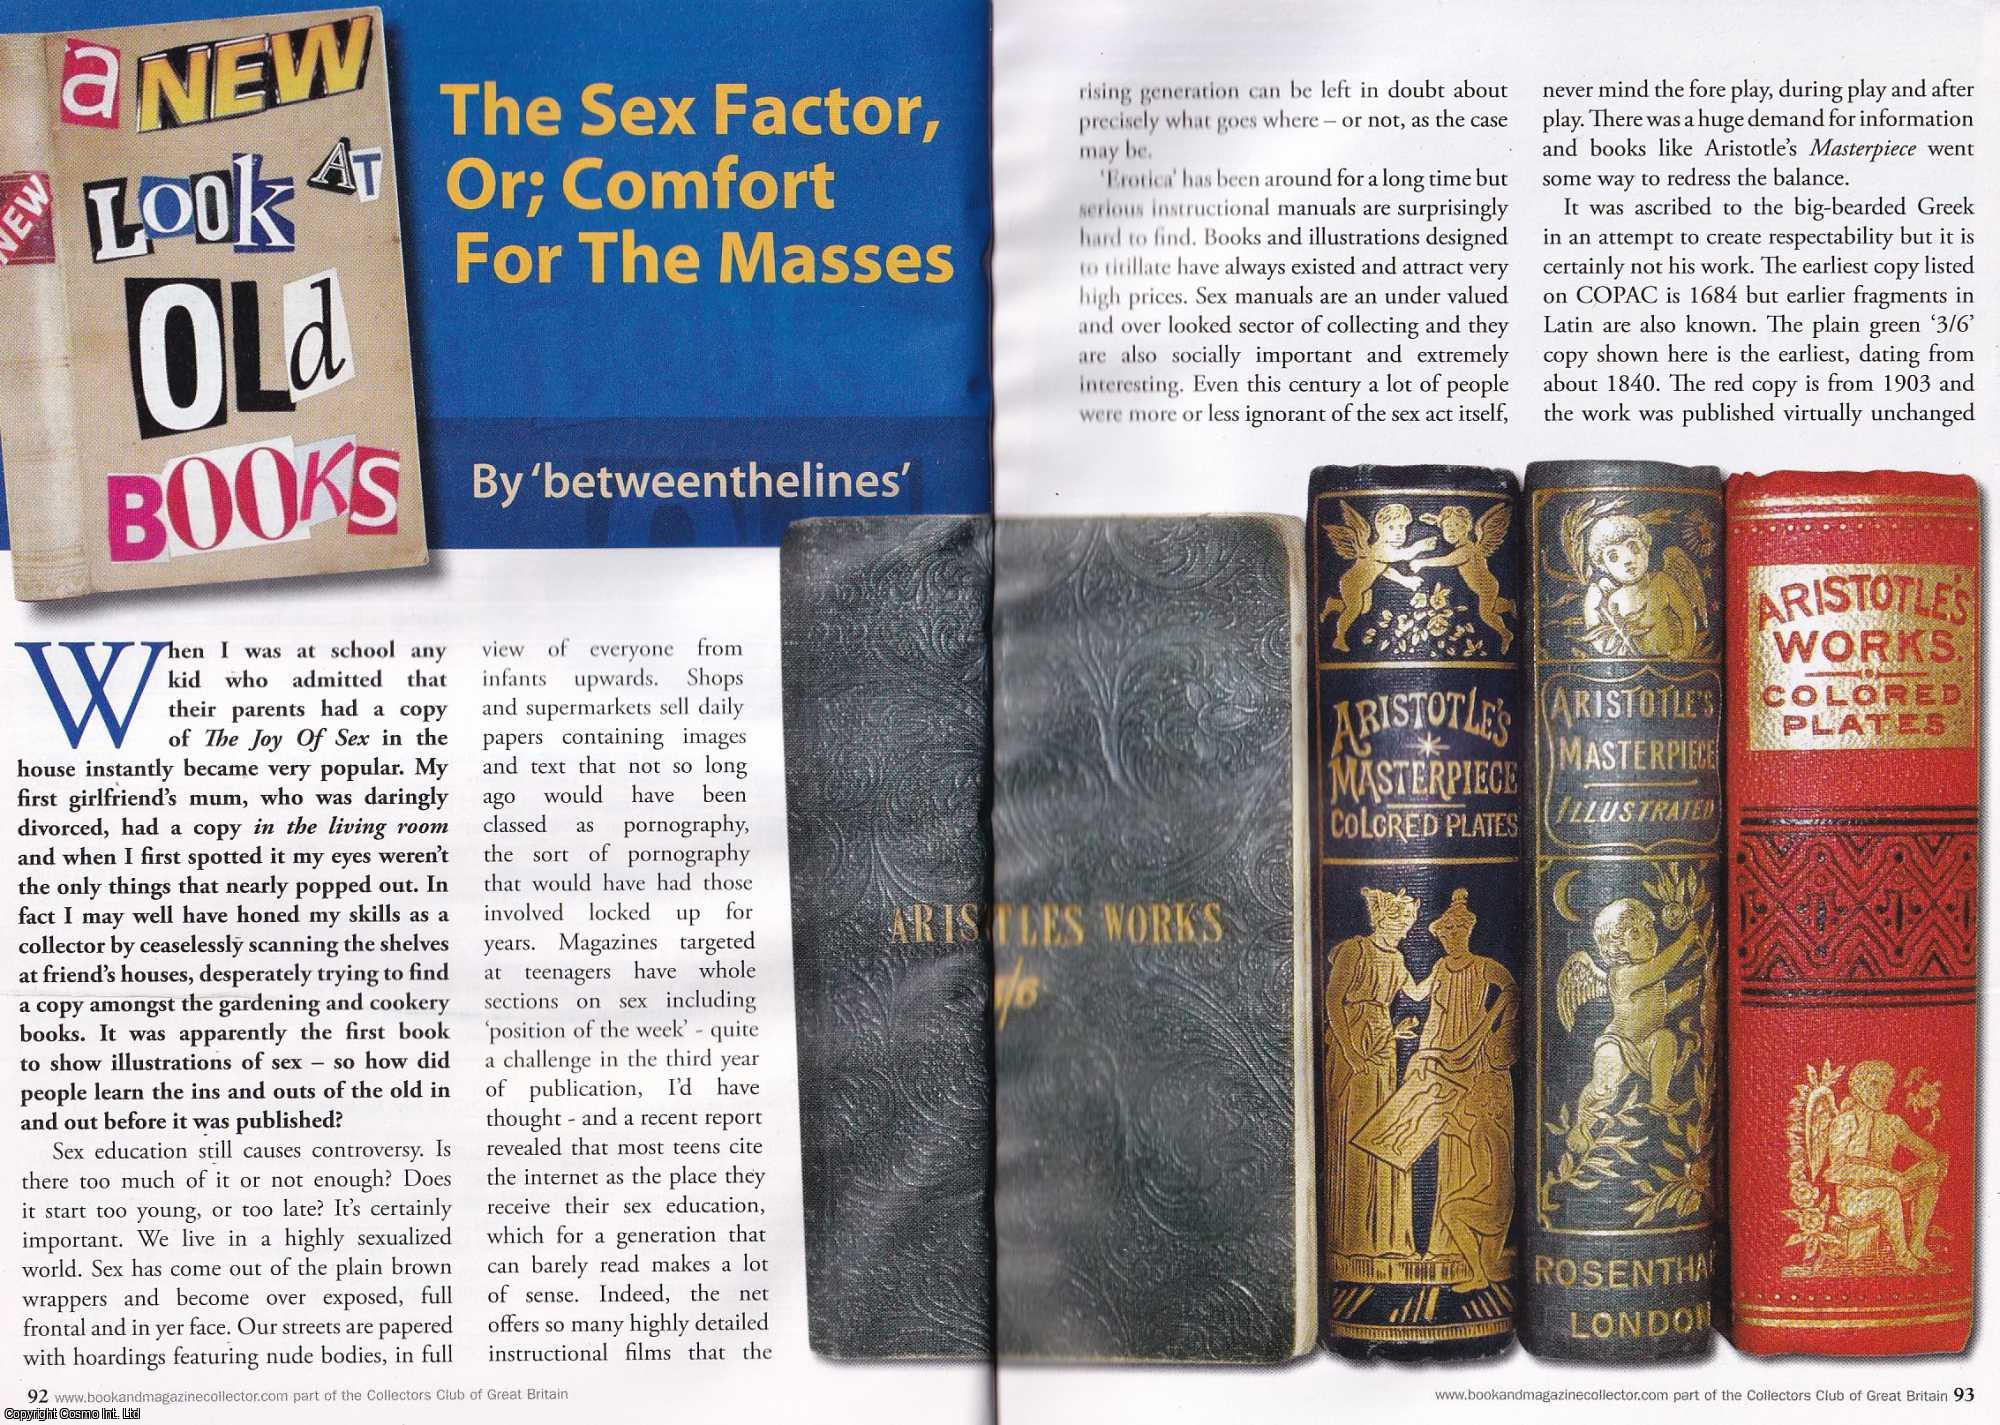 Unstated - The Sex Factor, or Comfort for The Masses : A New Look at Old Books. This is an original article separated from an issue of The Book & Magazine Collector publication.